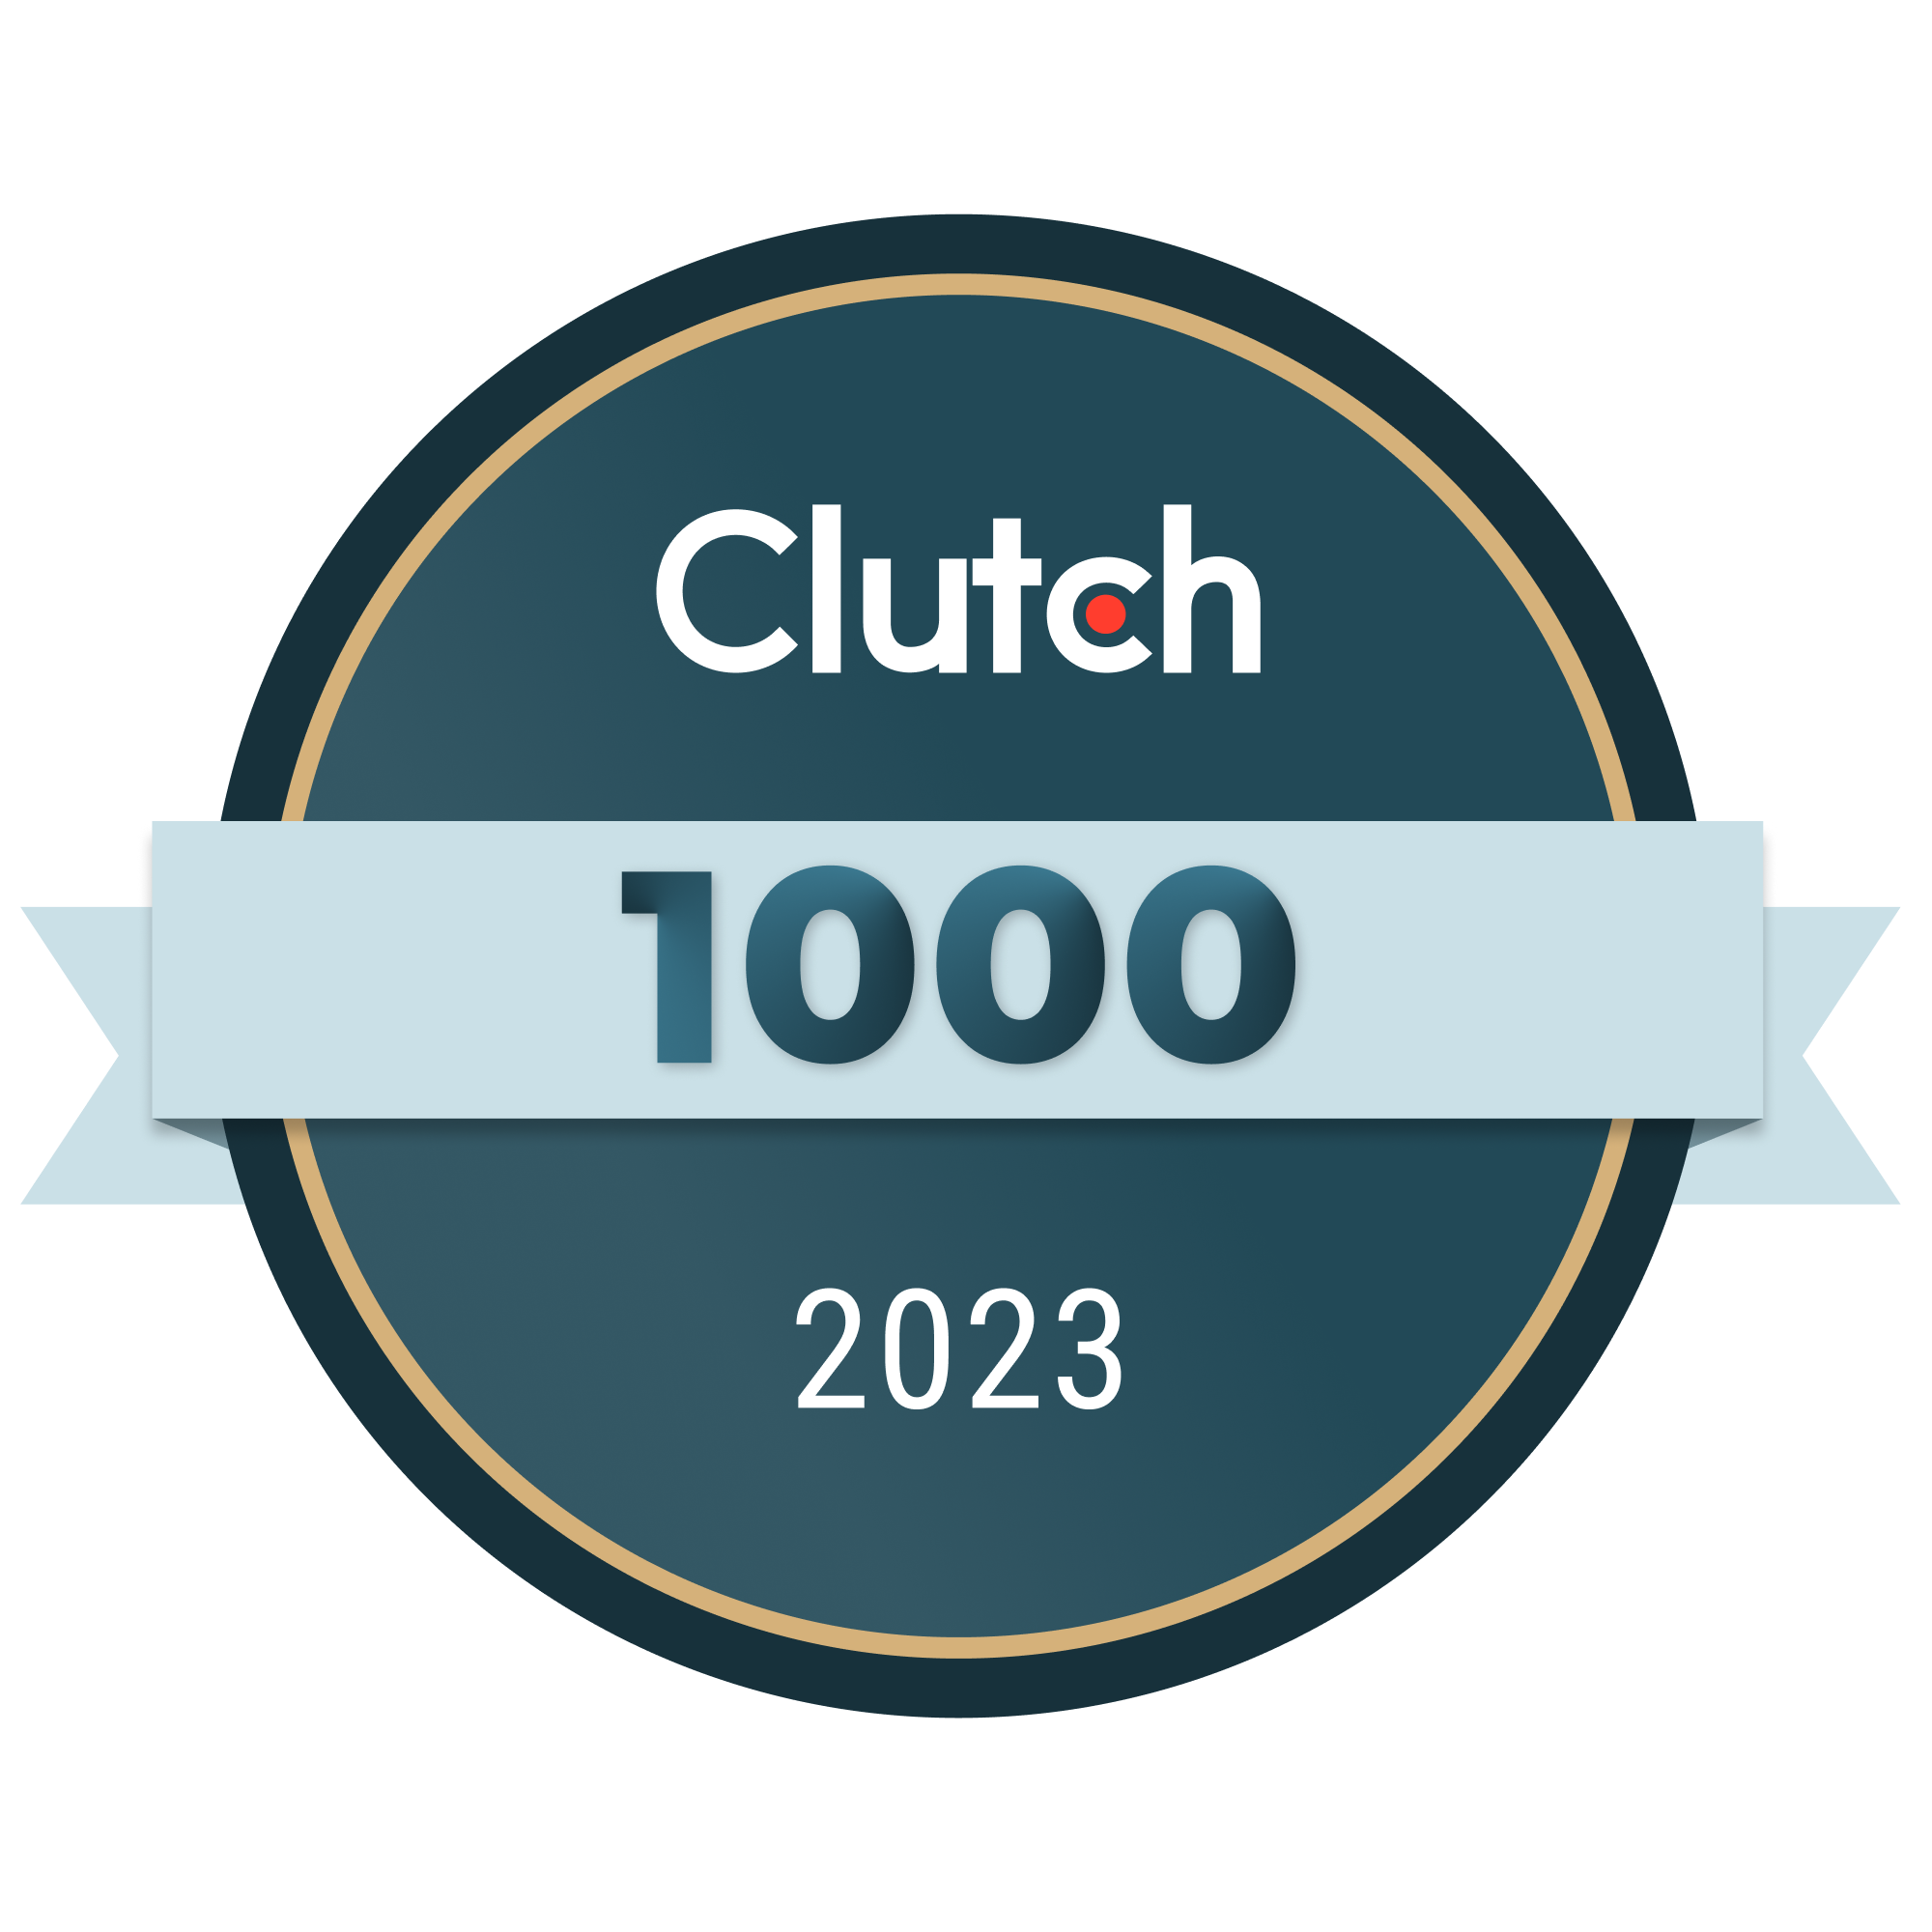 CloudFlex is top 1000 service provider 2023 by Clutch